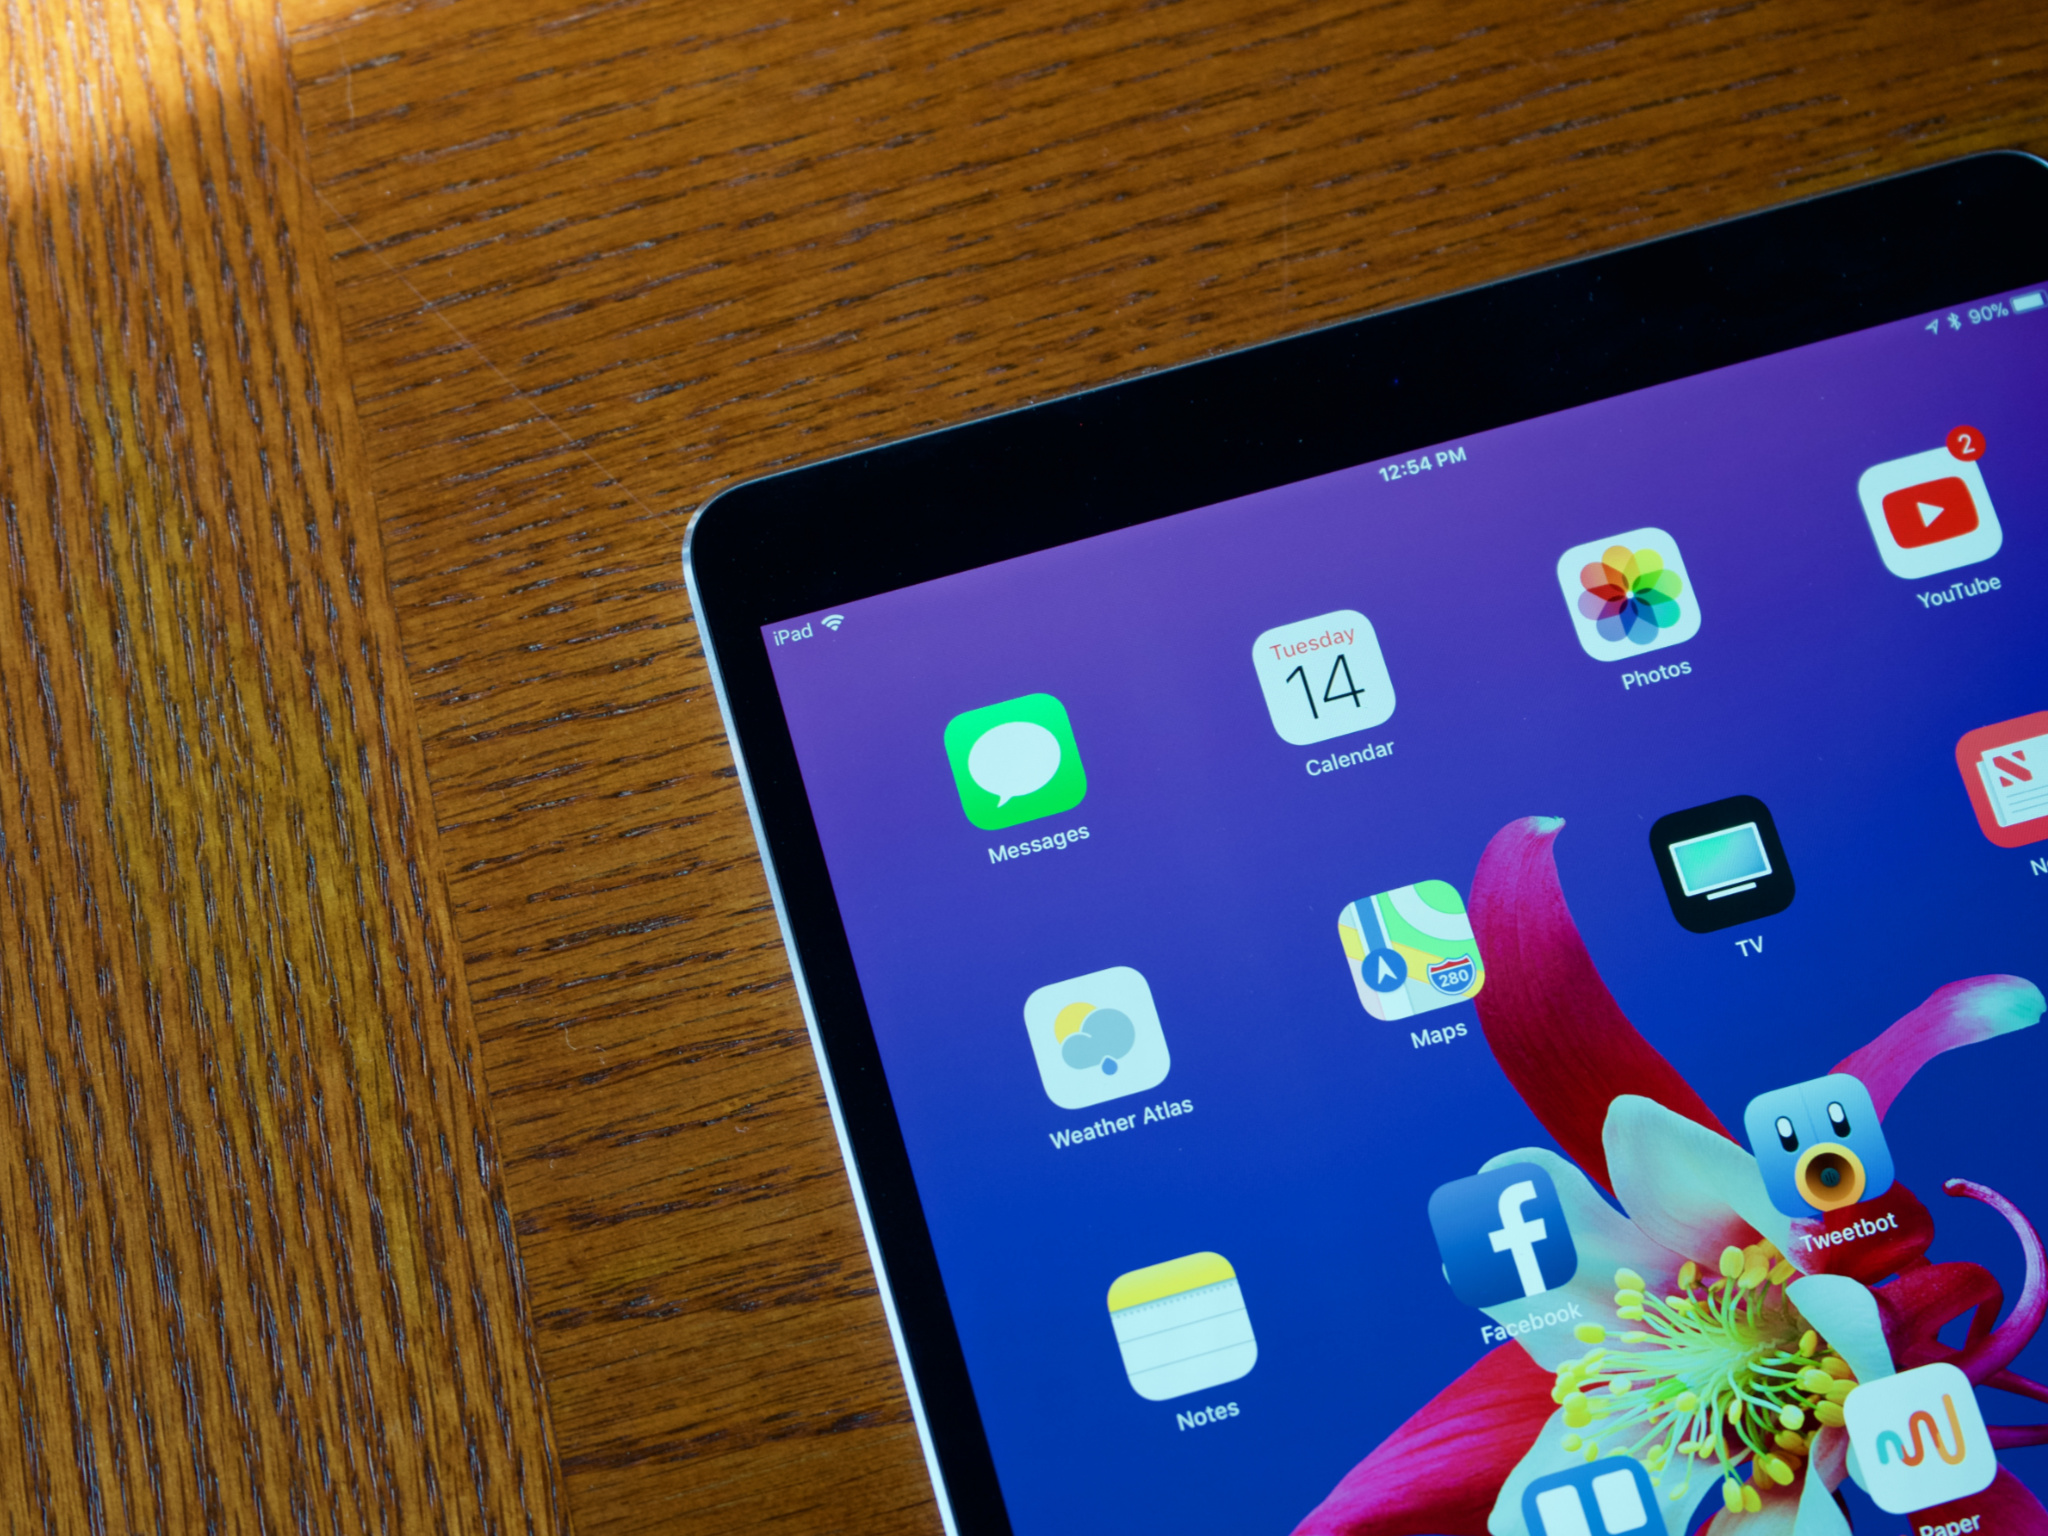 How to get SMS text messages on your iPad